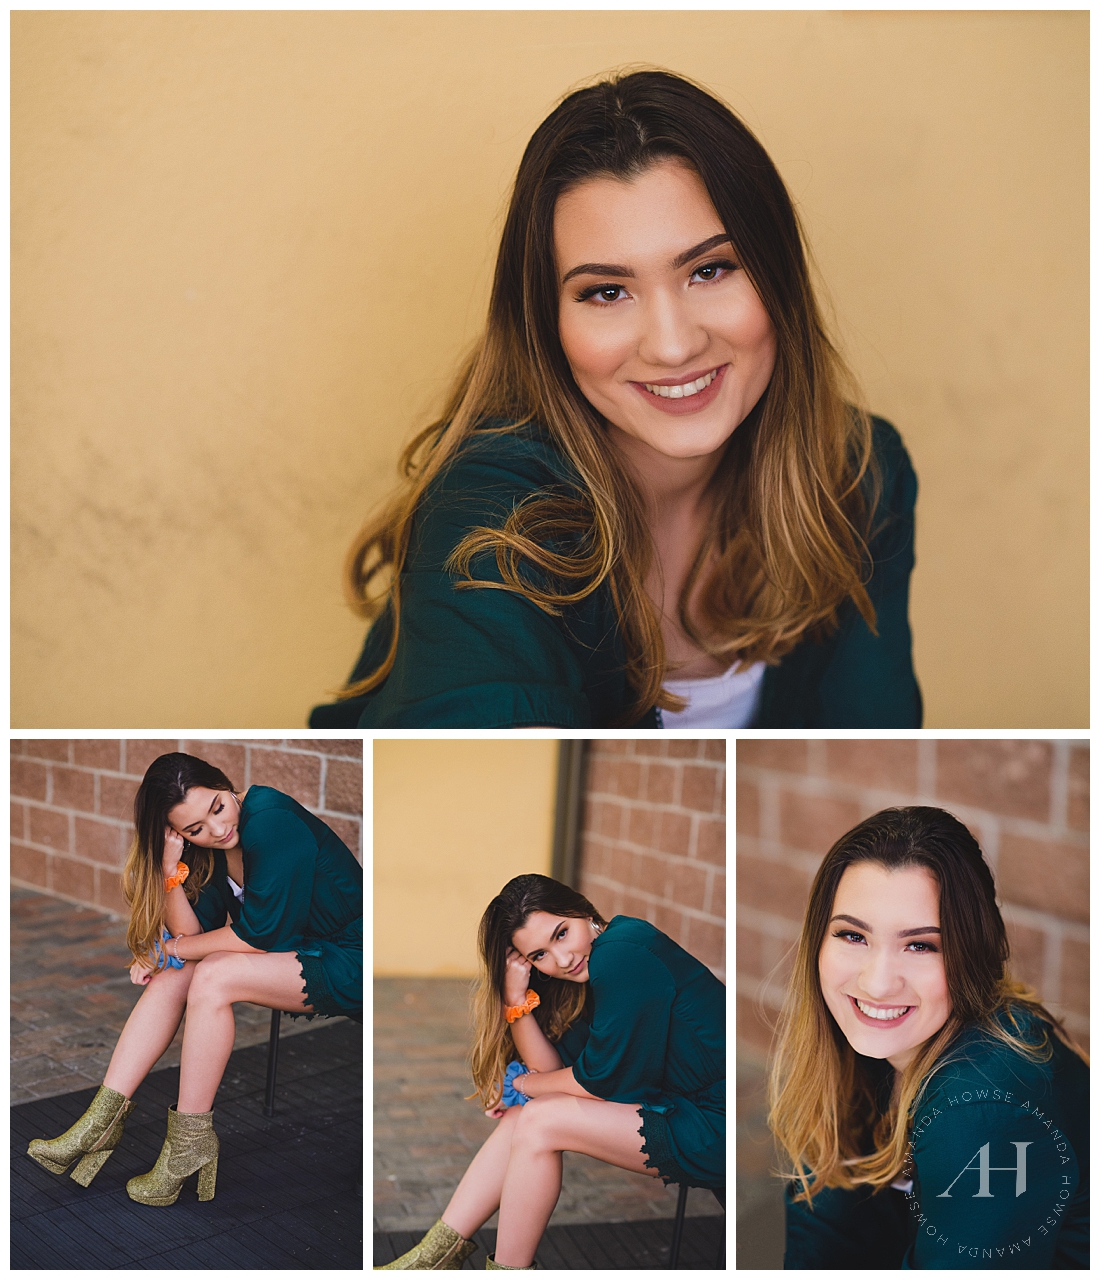 Glam Senior Portraits with Gold Go-Go Boots | Outfit Inspiration for High School Senior Girls | Photographed by Amanda Howse